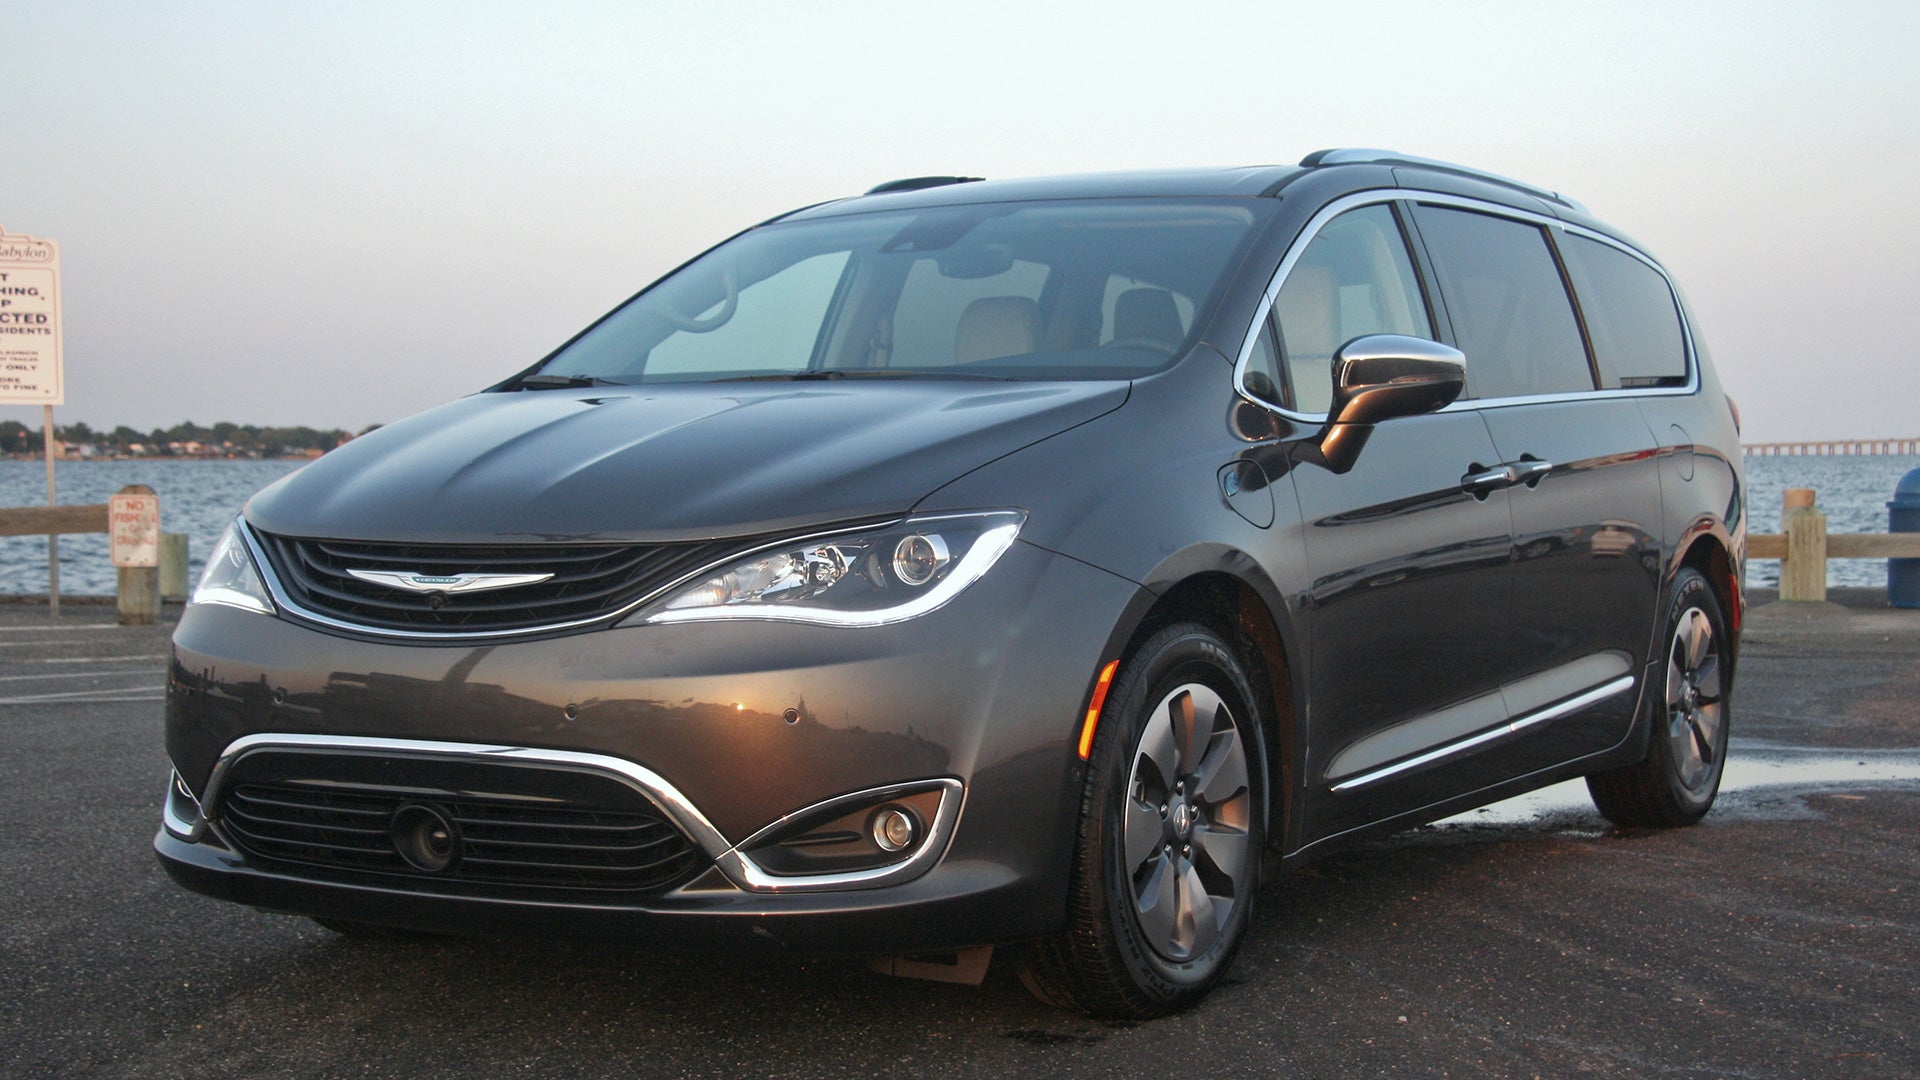 2019 Chrysler Pacifica Hybrid New Dad Review: This Plug-In Minivan